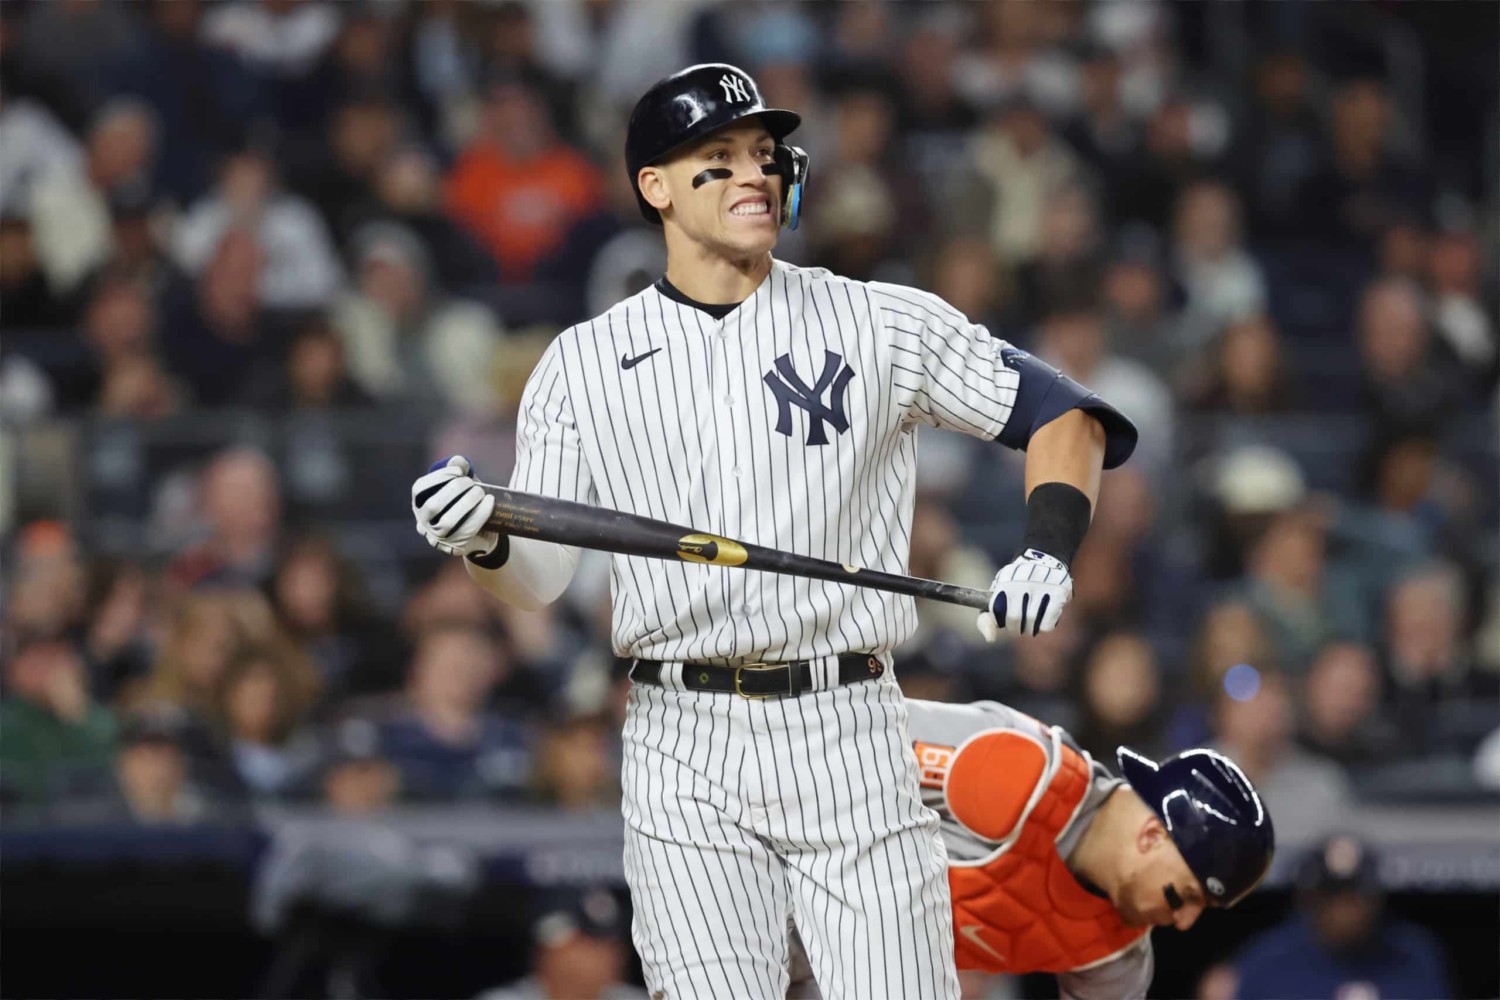 Watch: Aaron Judge homers three times, sets cool record